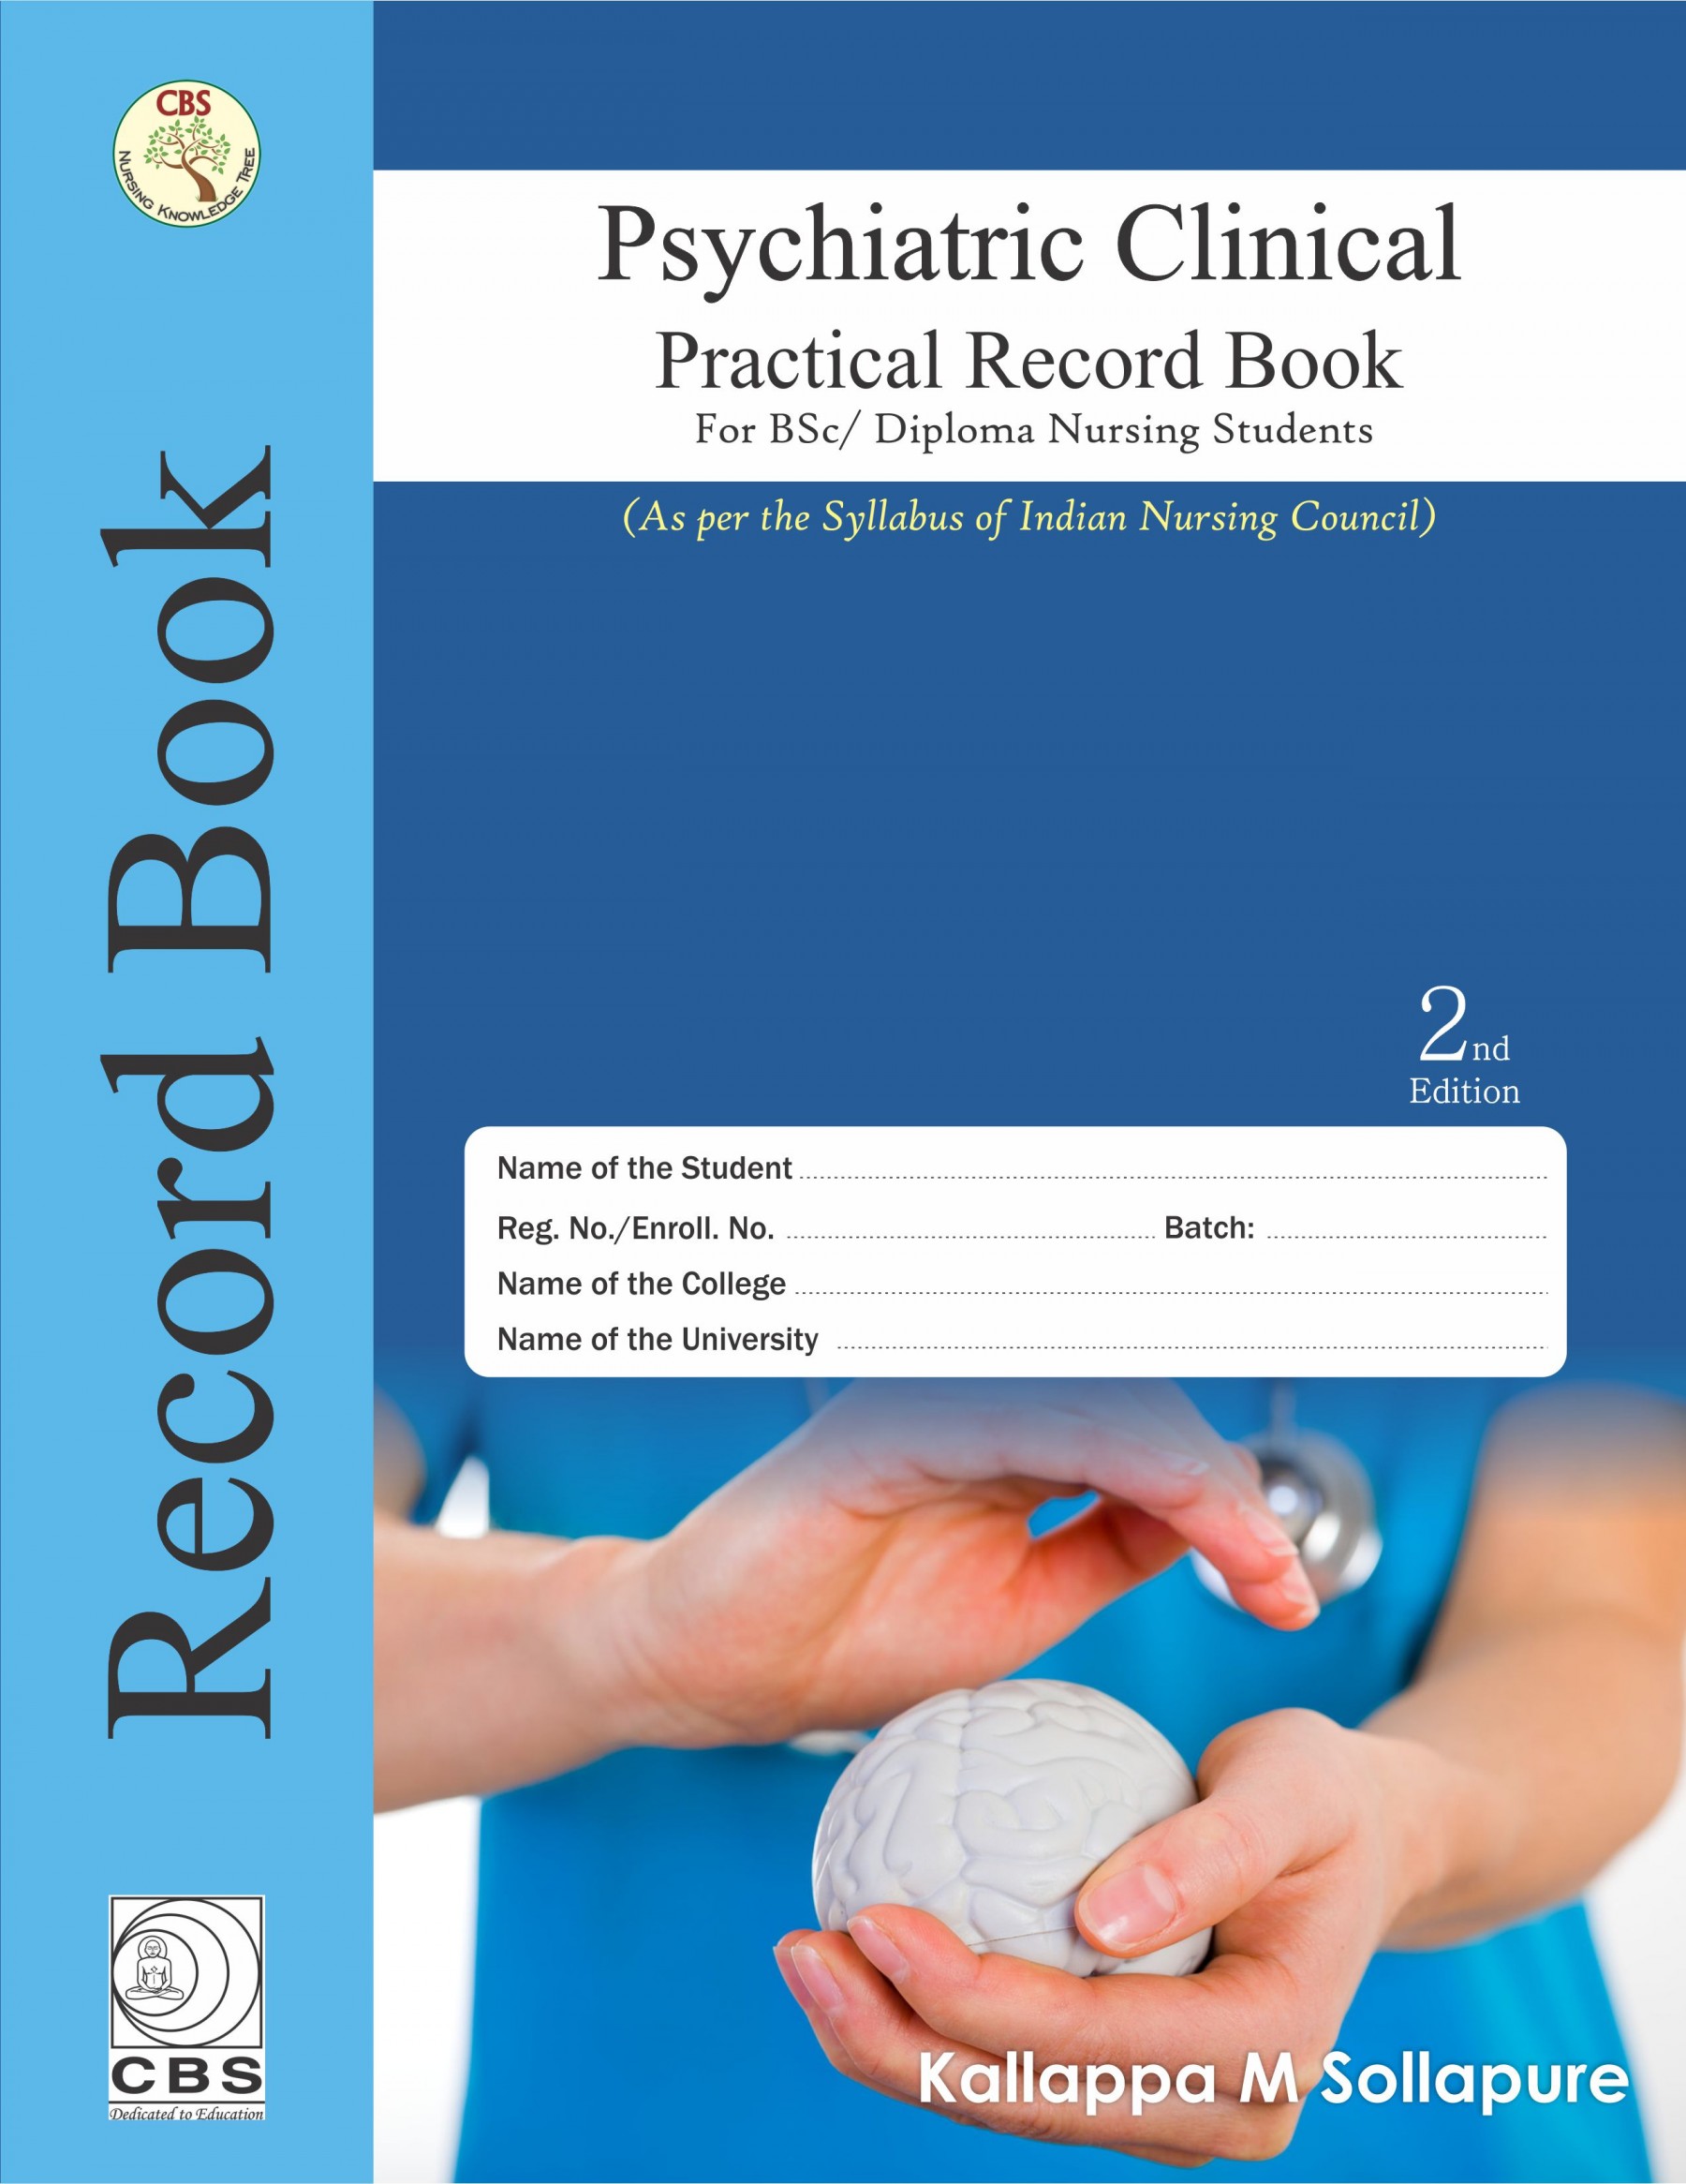 Psychiatric Clinical Practical Record Book for BSc/Diploma Nursing Students